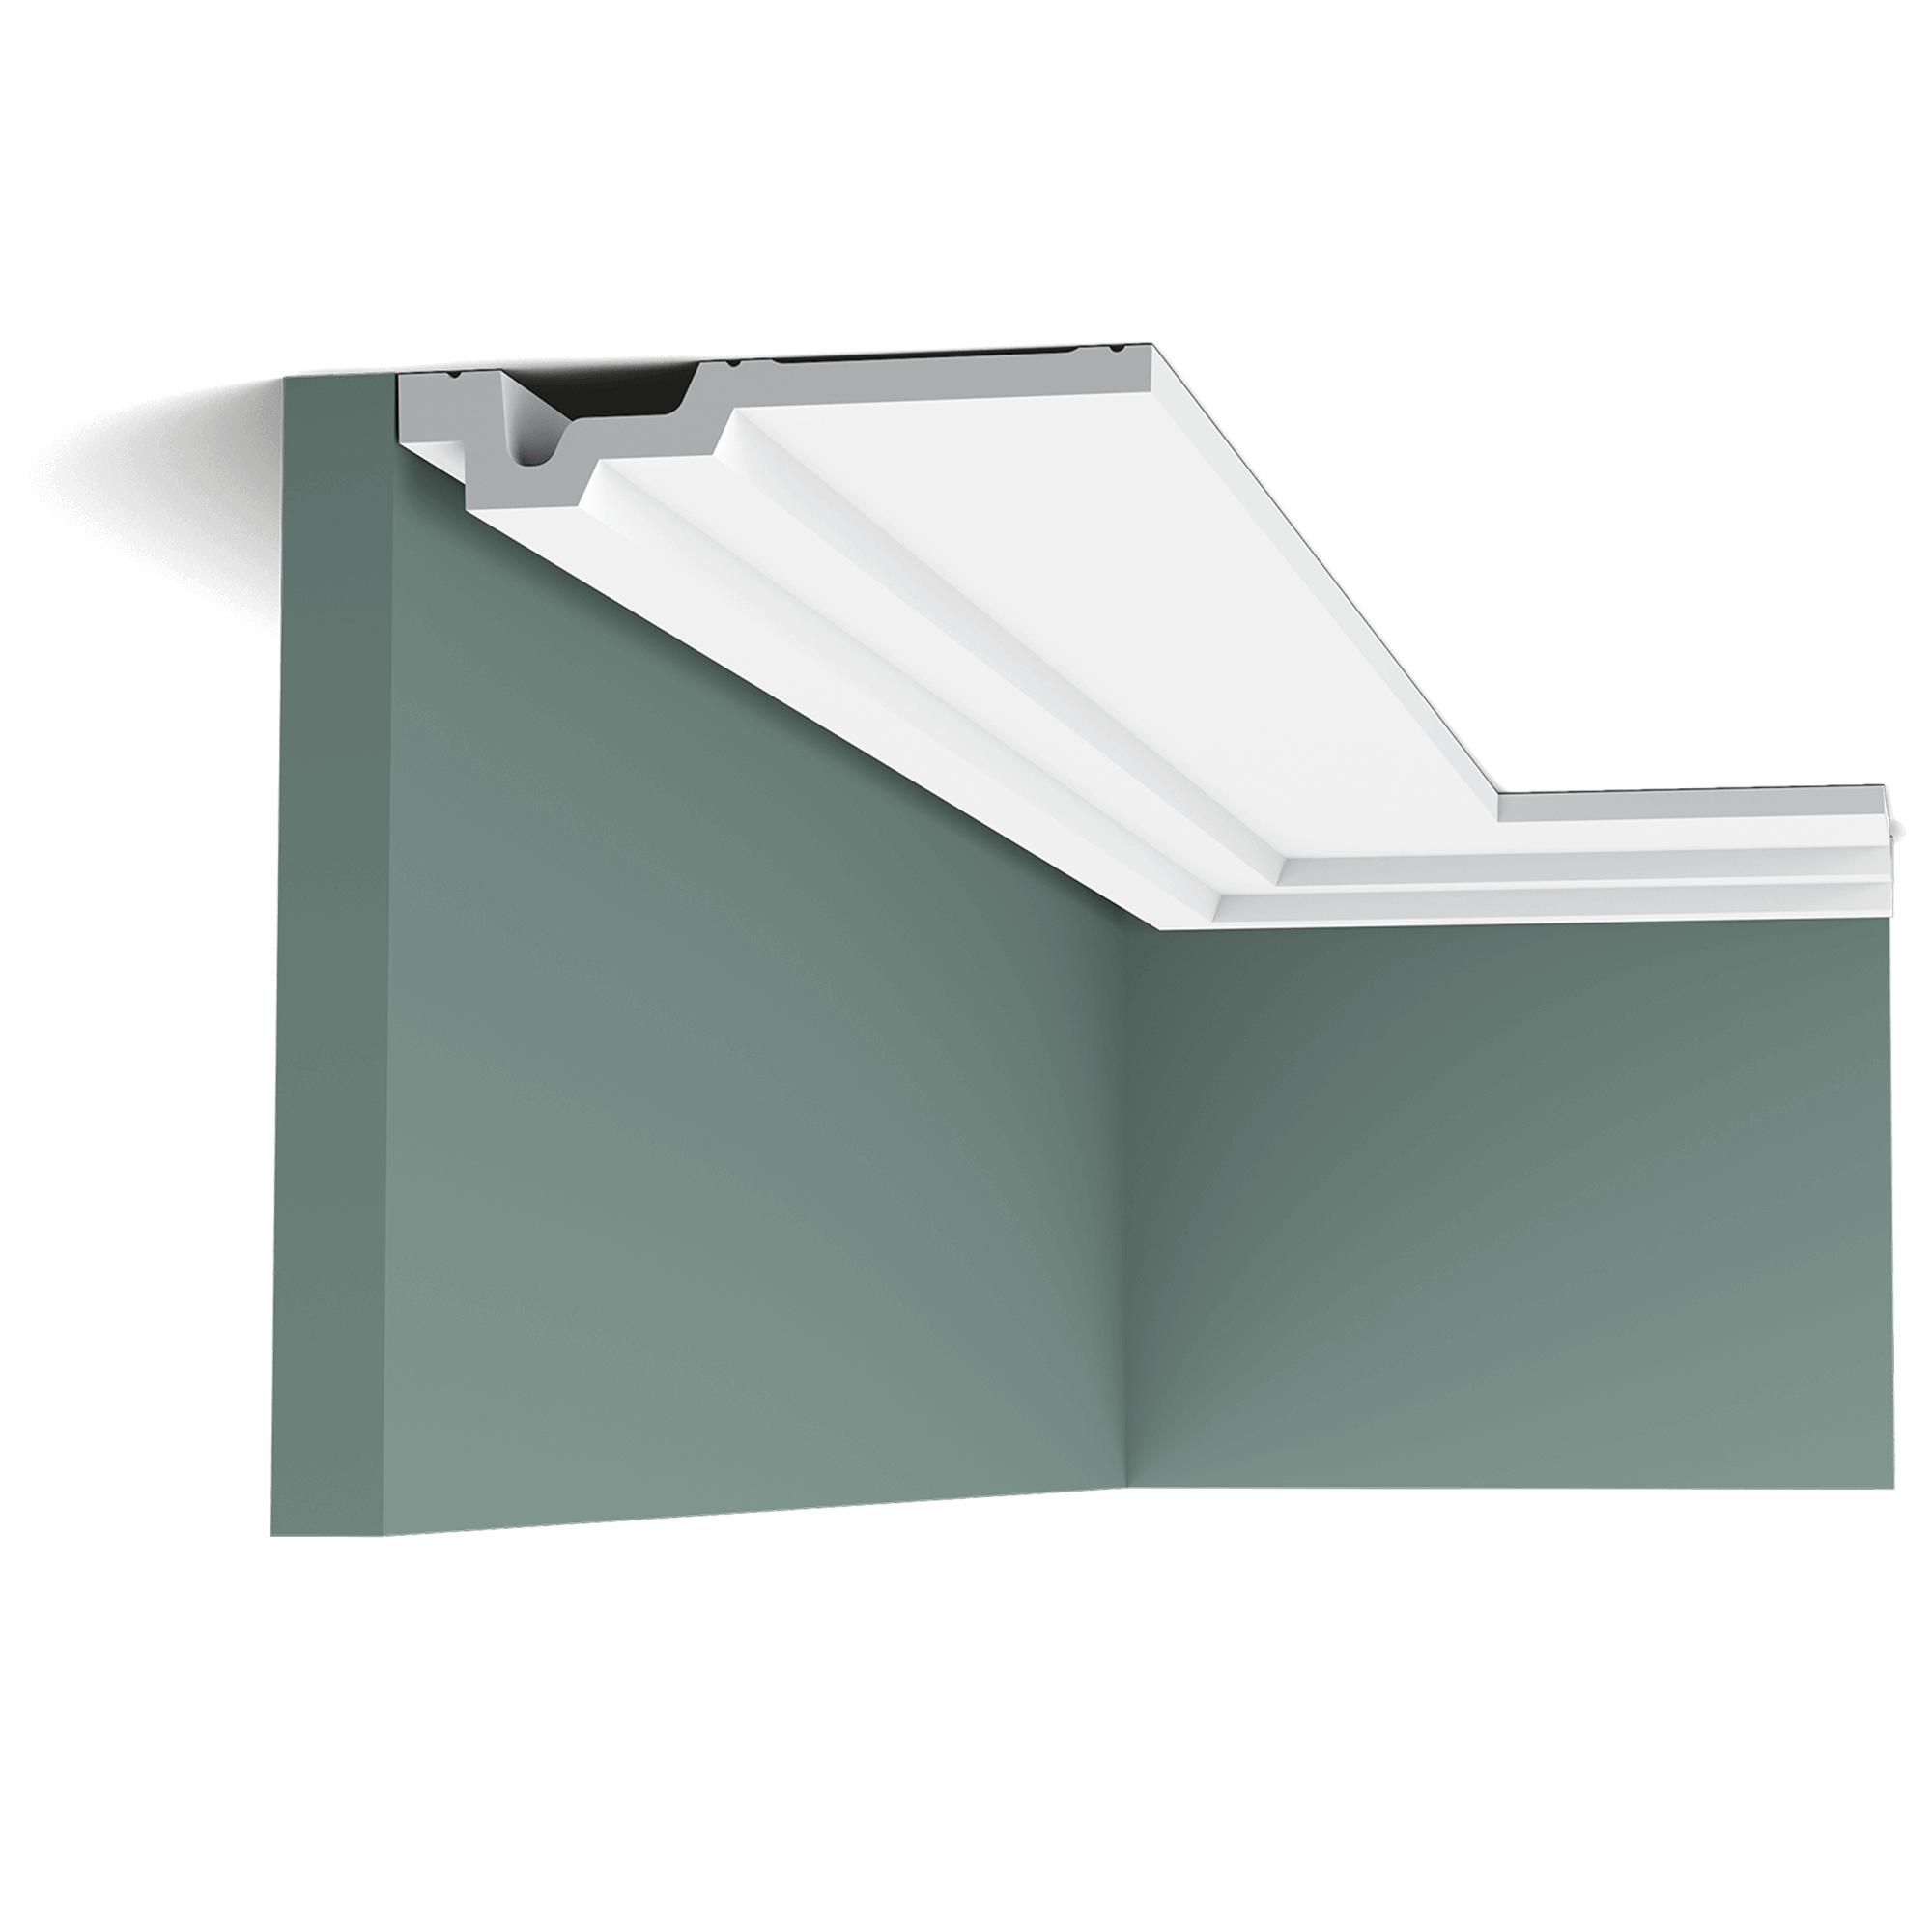 c353 cornice moulding 233d This flat cornice moulding which extends along the ceiling provides a floating effect thanks to the recessed shadow line. Designed by Jacques Vergracht.